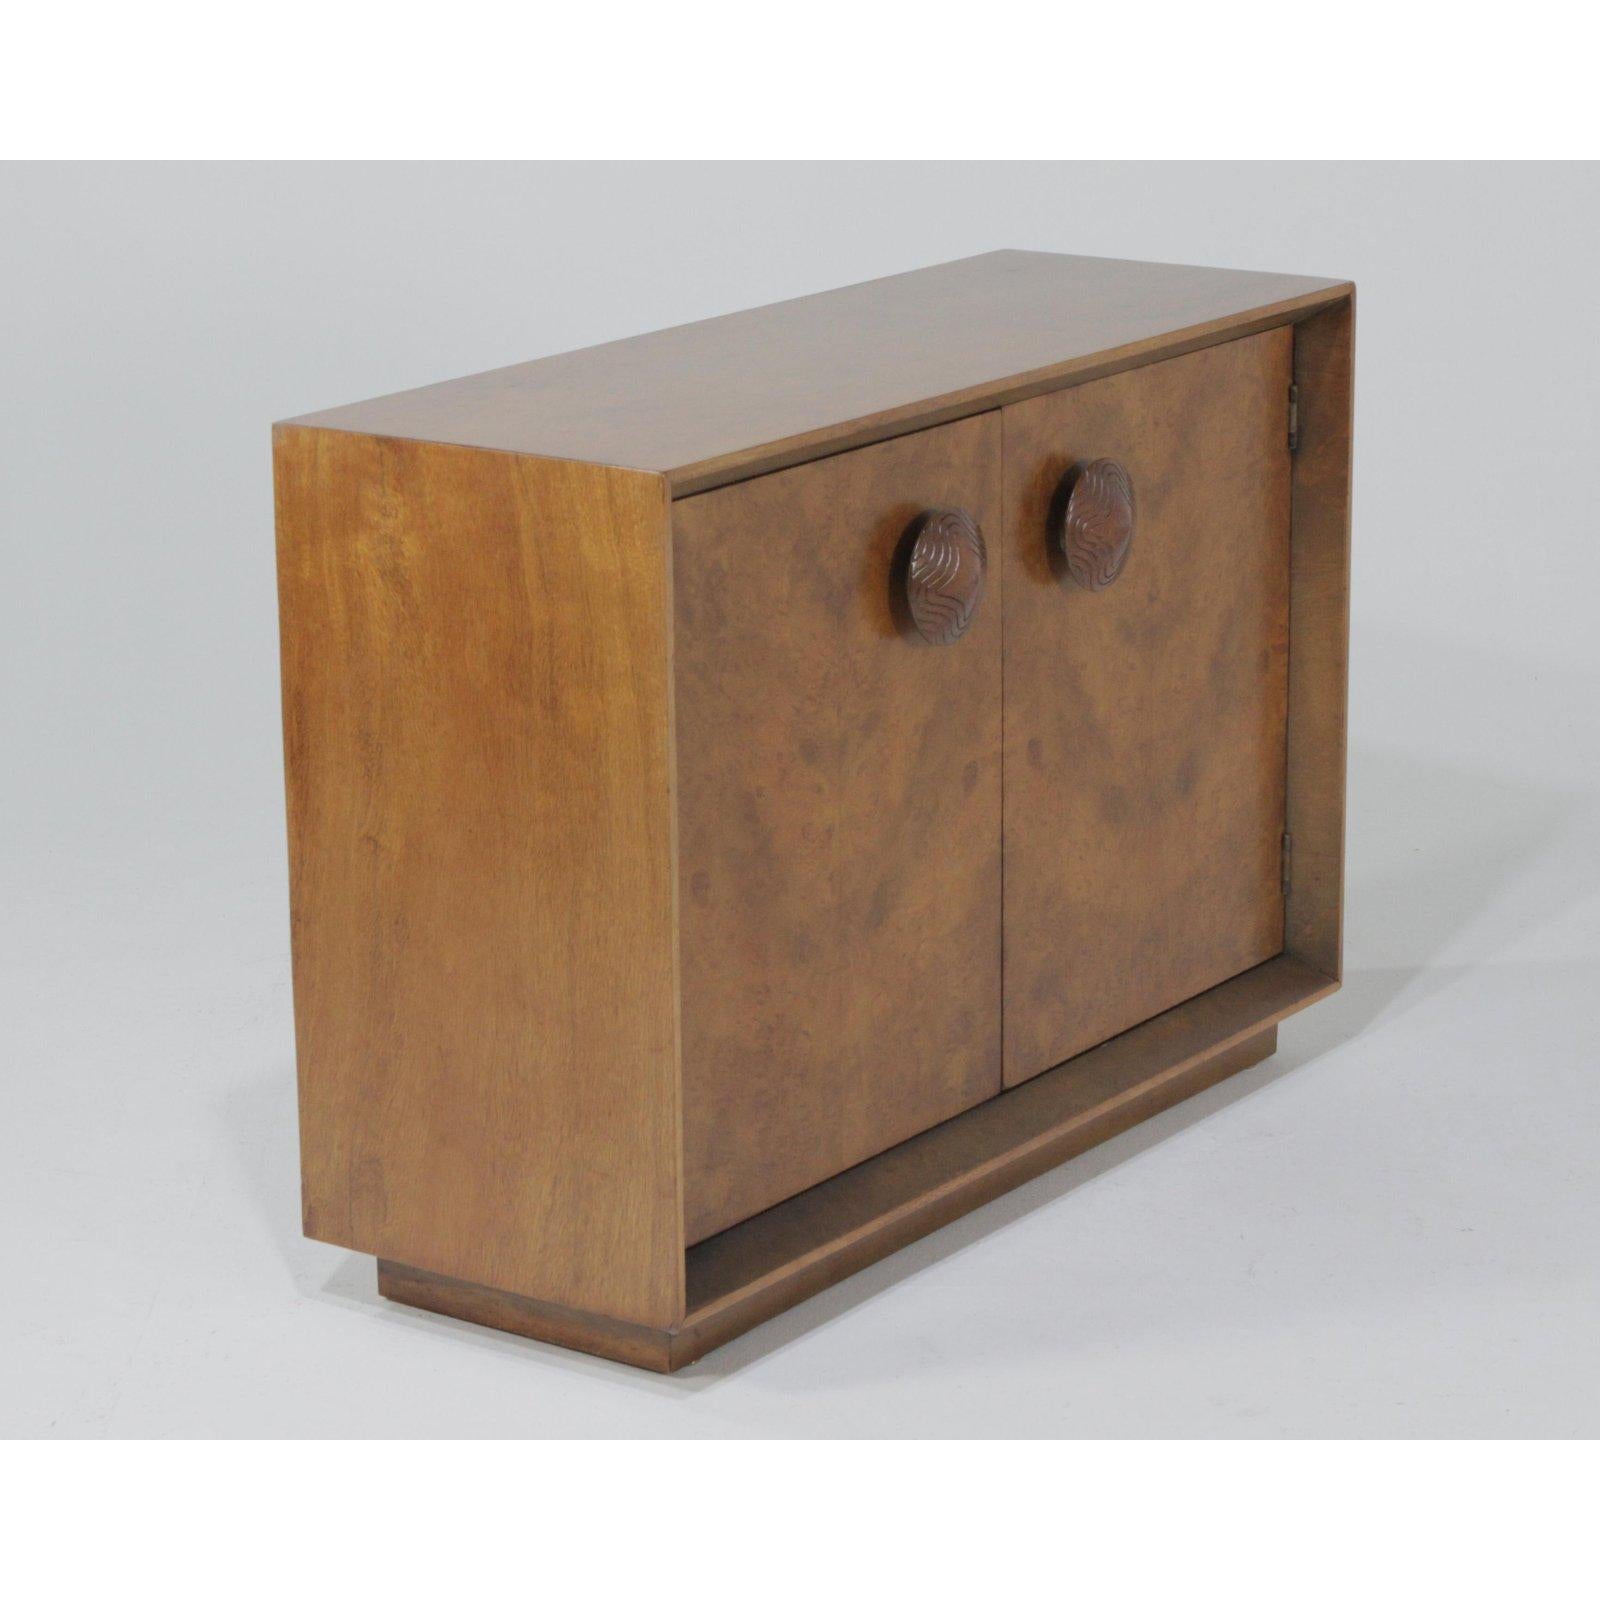 A lovely Paldao cabinet designed by Gilbert Rohde for Herman Miller. An iconic design, with wonderfully figured burl front, oversized pulls, and large recess. Mid-Century Modern meets Art Deco here, and this piece will complement many designs.